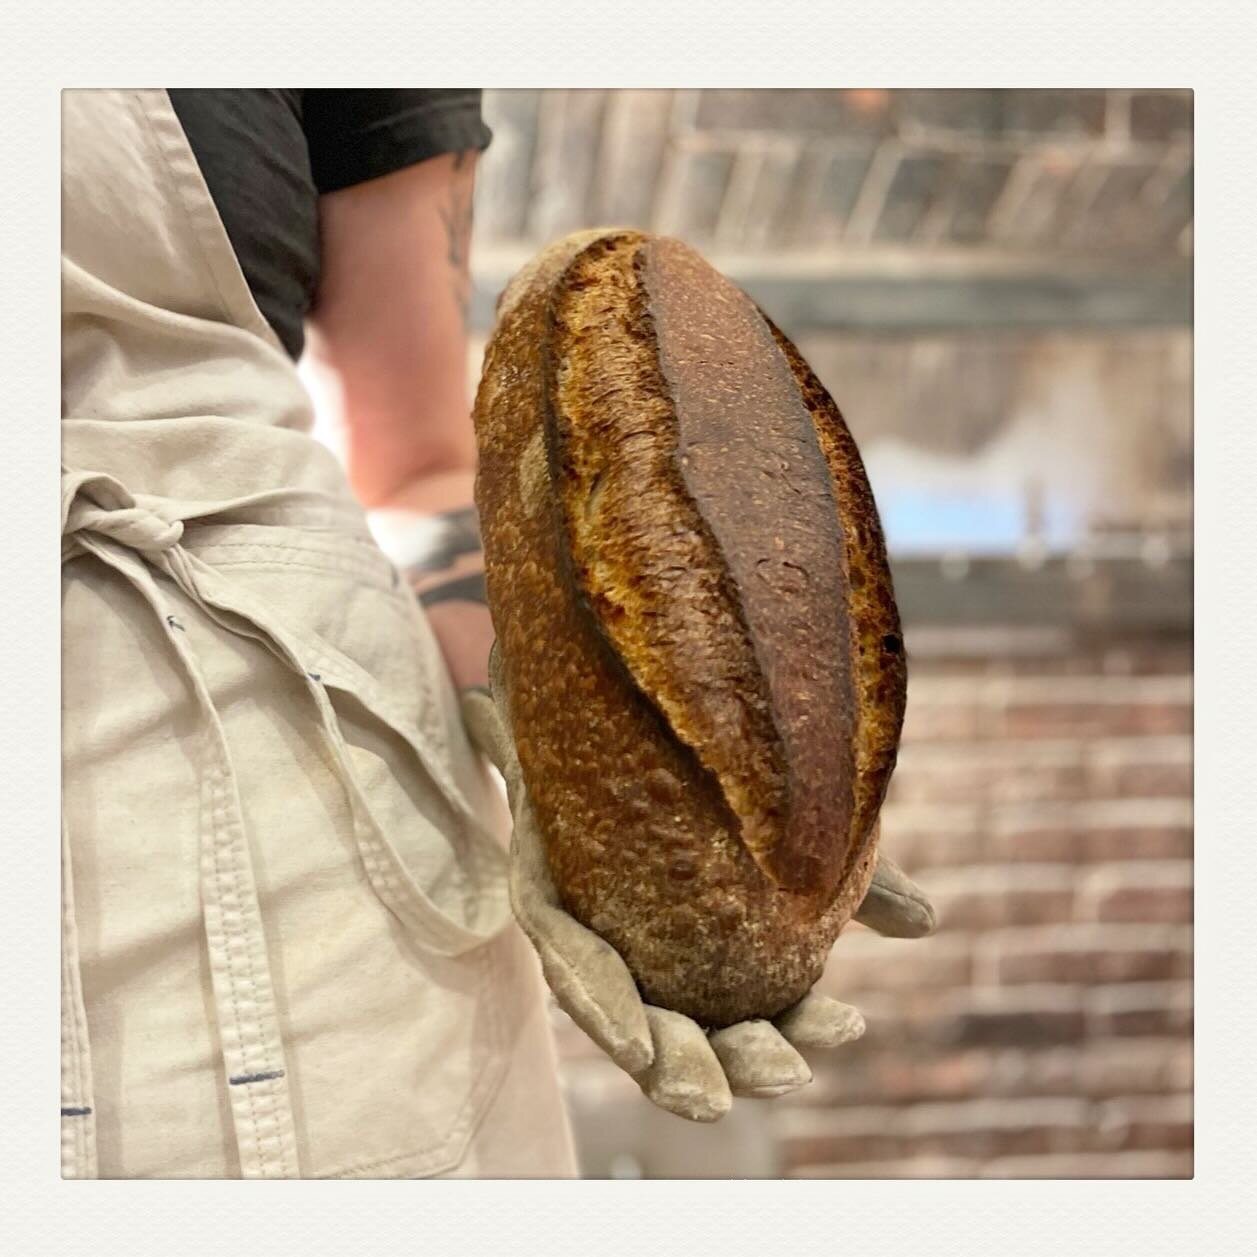 Country French (Organic Redeemer Wheat @nittygrittygrain/ Organic Rye @thornhillfarmvermont / Organic Bolles Wheat #morningstarfarm) If you&rsquo;re a member of @petes.greens CSA, these beauties are headed your way&hellip; #stoneground #millyesterday